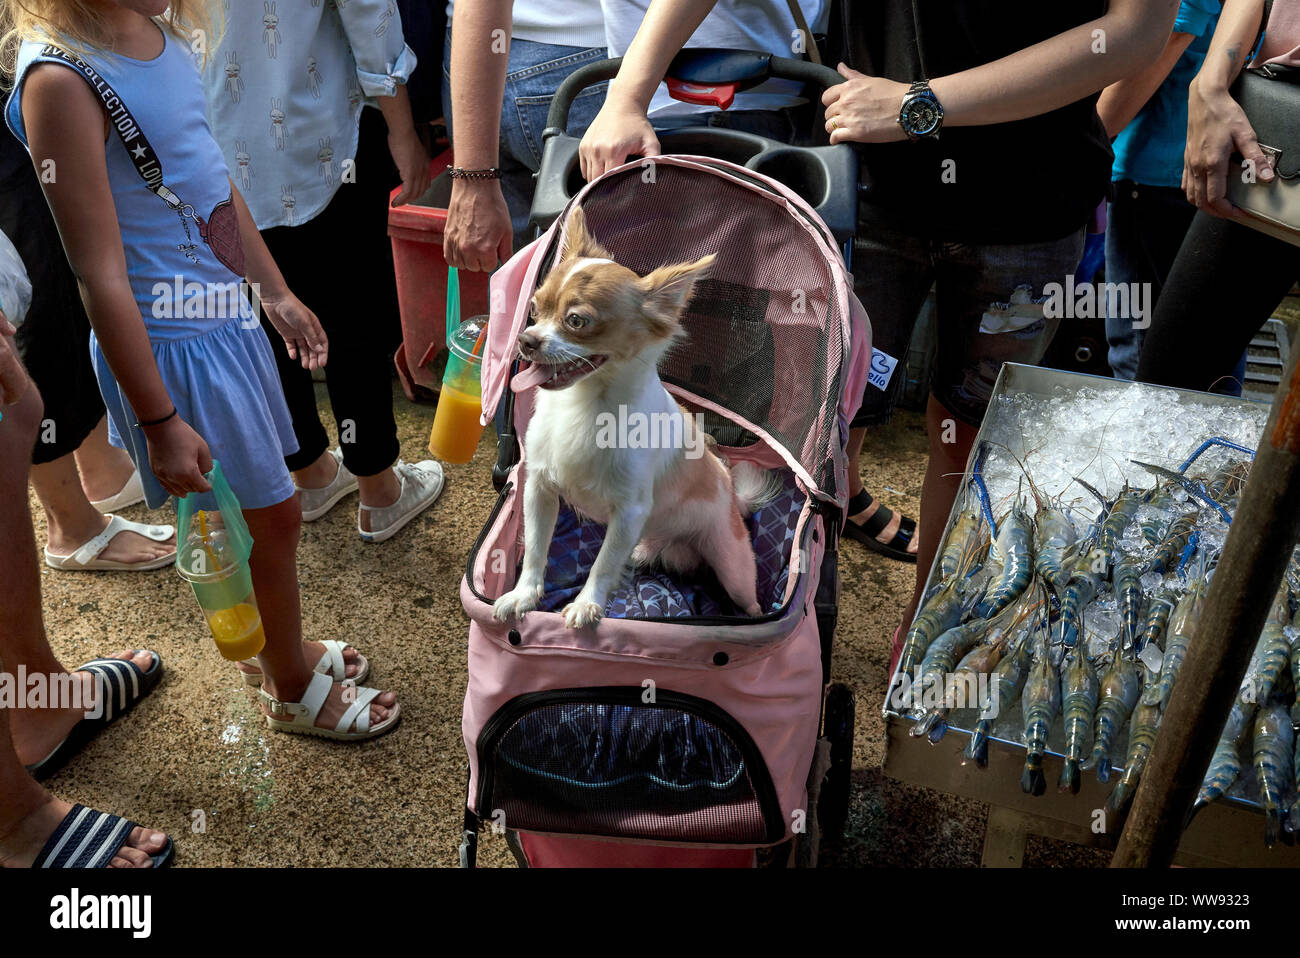 Pampered pet in a child's pushchair at a Thailand street market. Dog. Chihuahua. Stock Photo